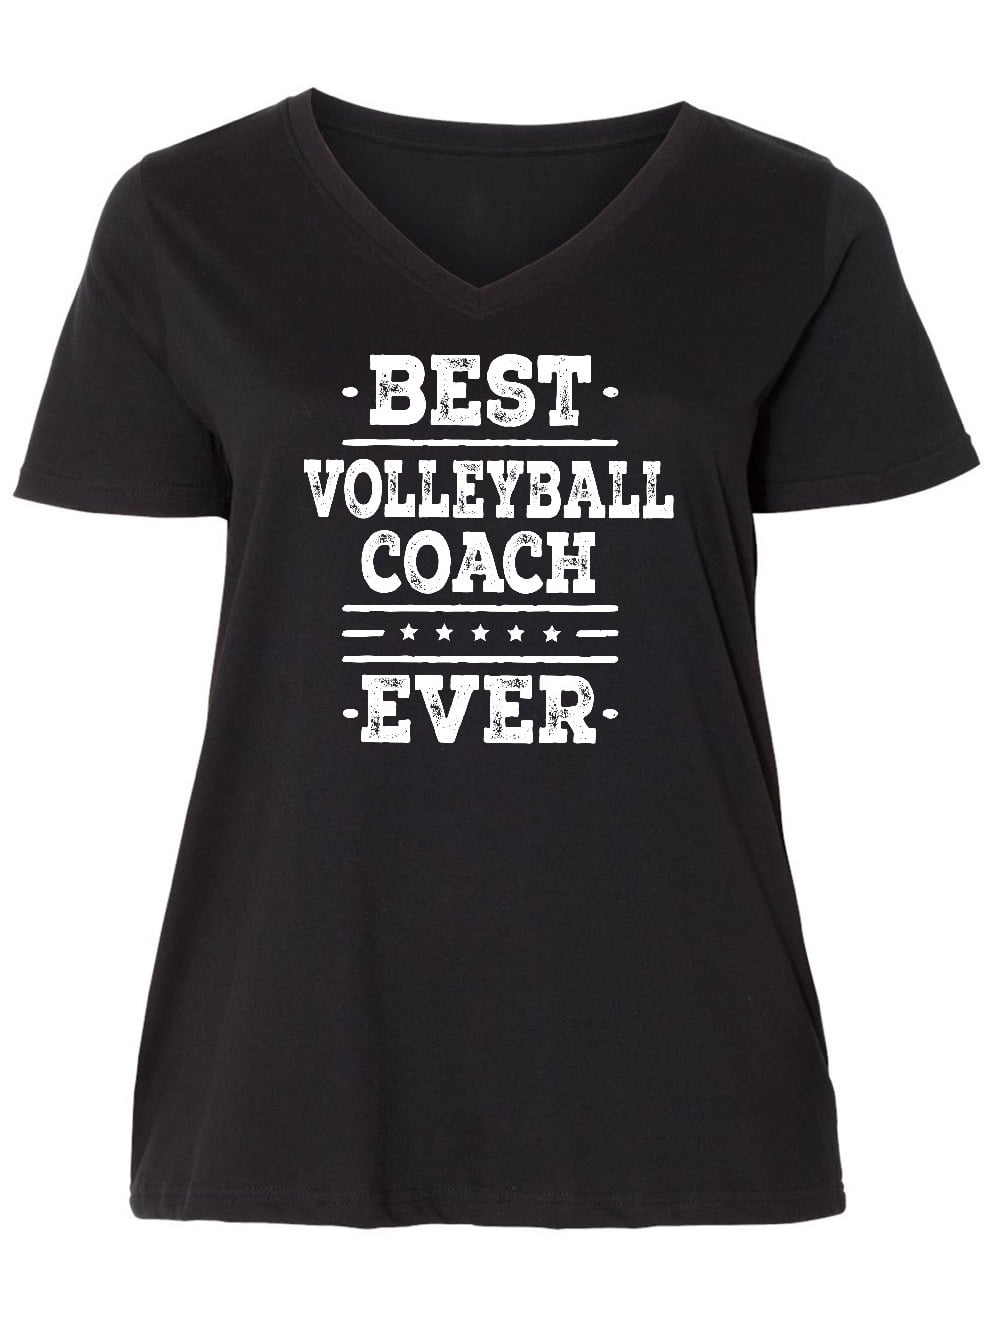 Inktastic Best Volleyball Coach Ever Adult Women's Plus Size V-Neck ...